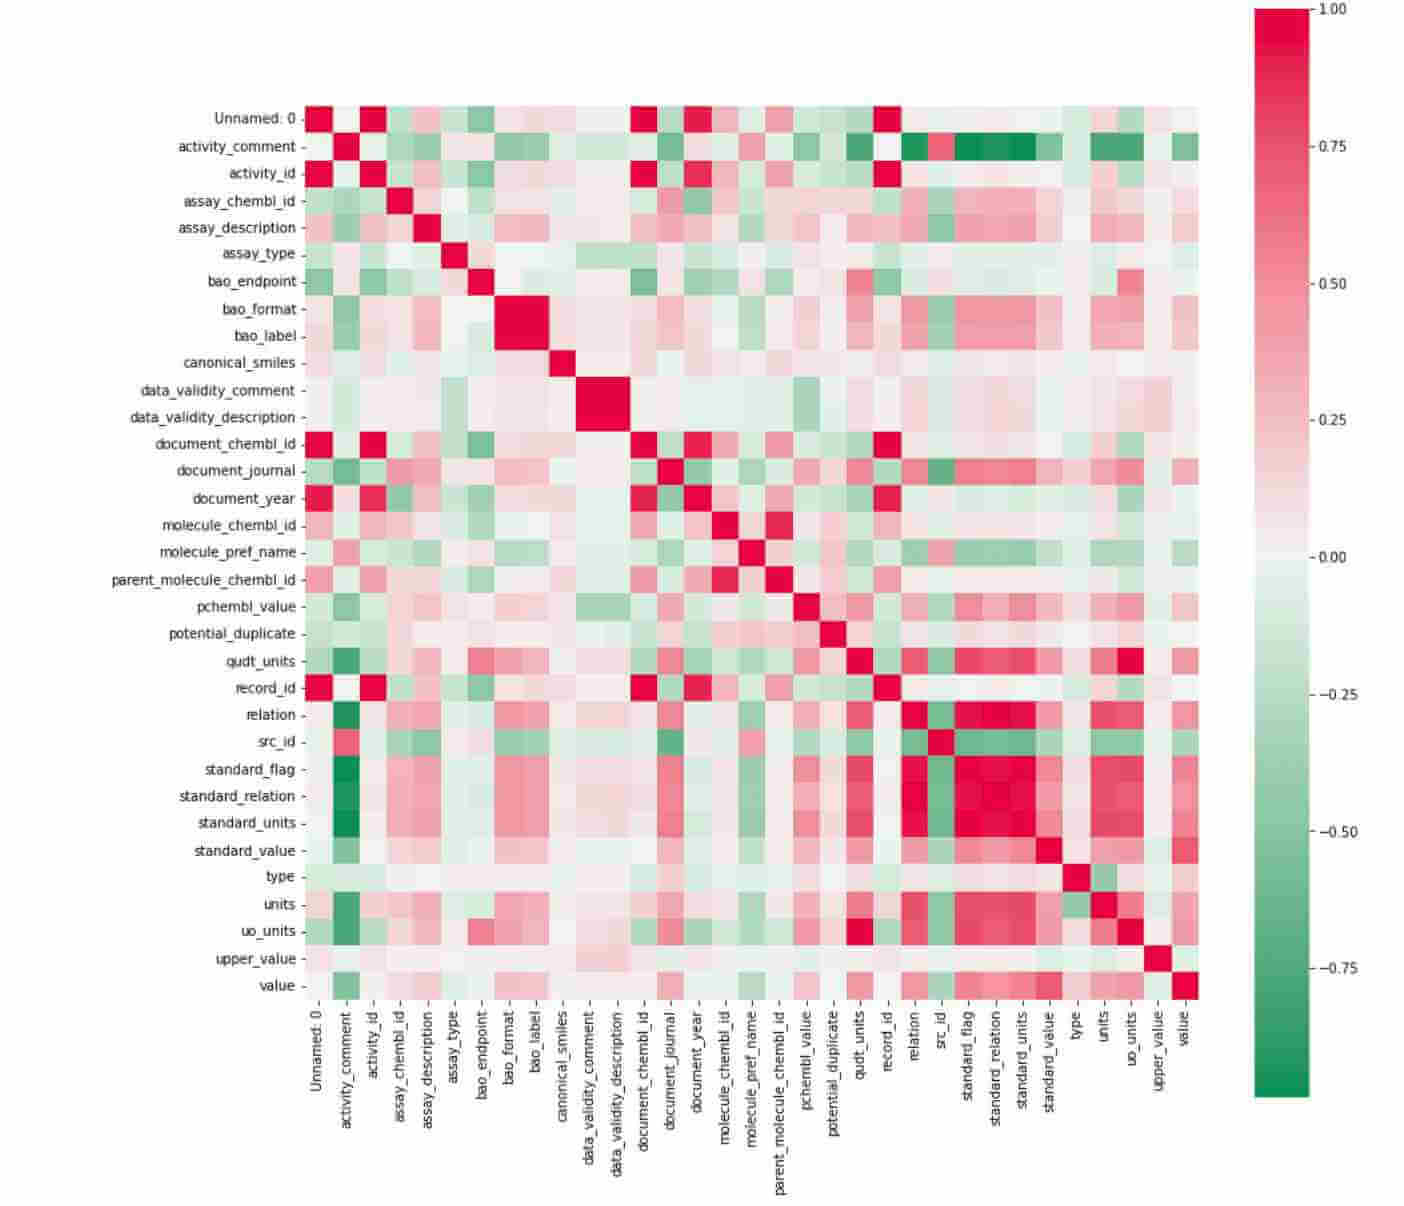 Heatmap of all the features in chembl dataset used for drug discovery project